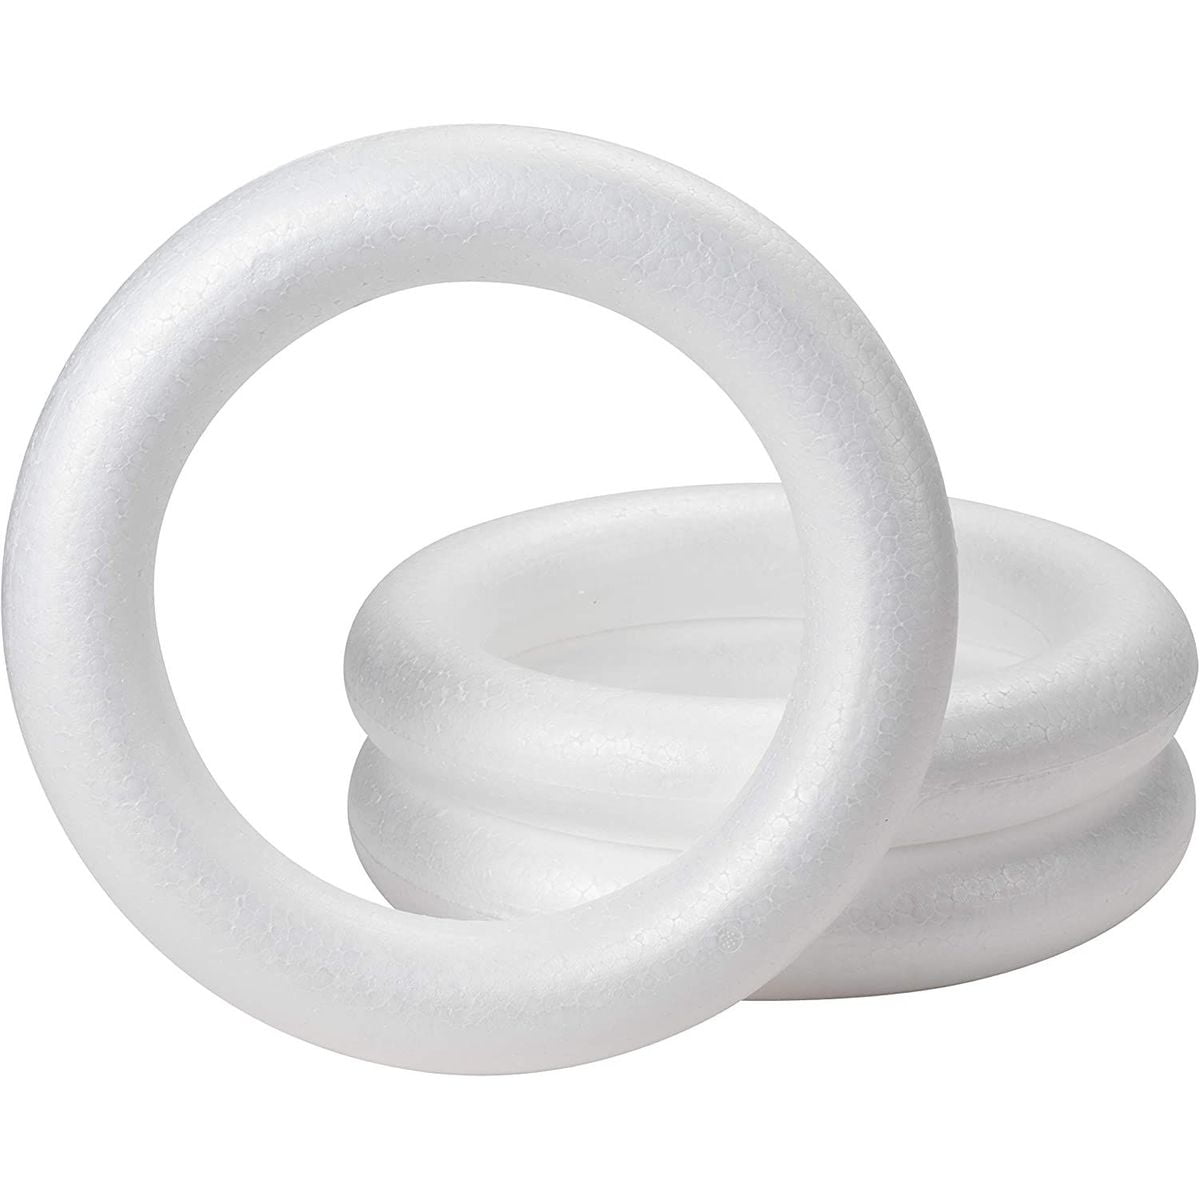 10 pc EPS Polystyrene Wreaths 10X2 White Craft Styrofoam Floral Ring with Rounded Edges 